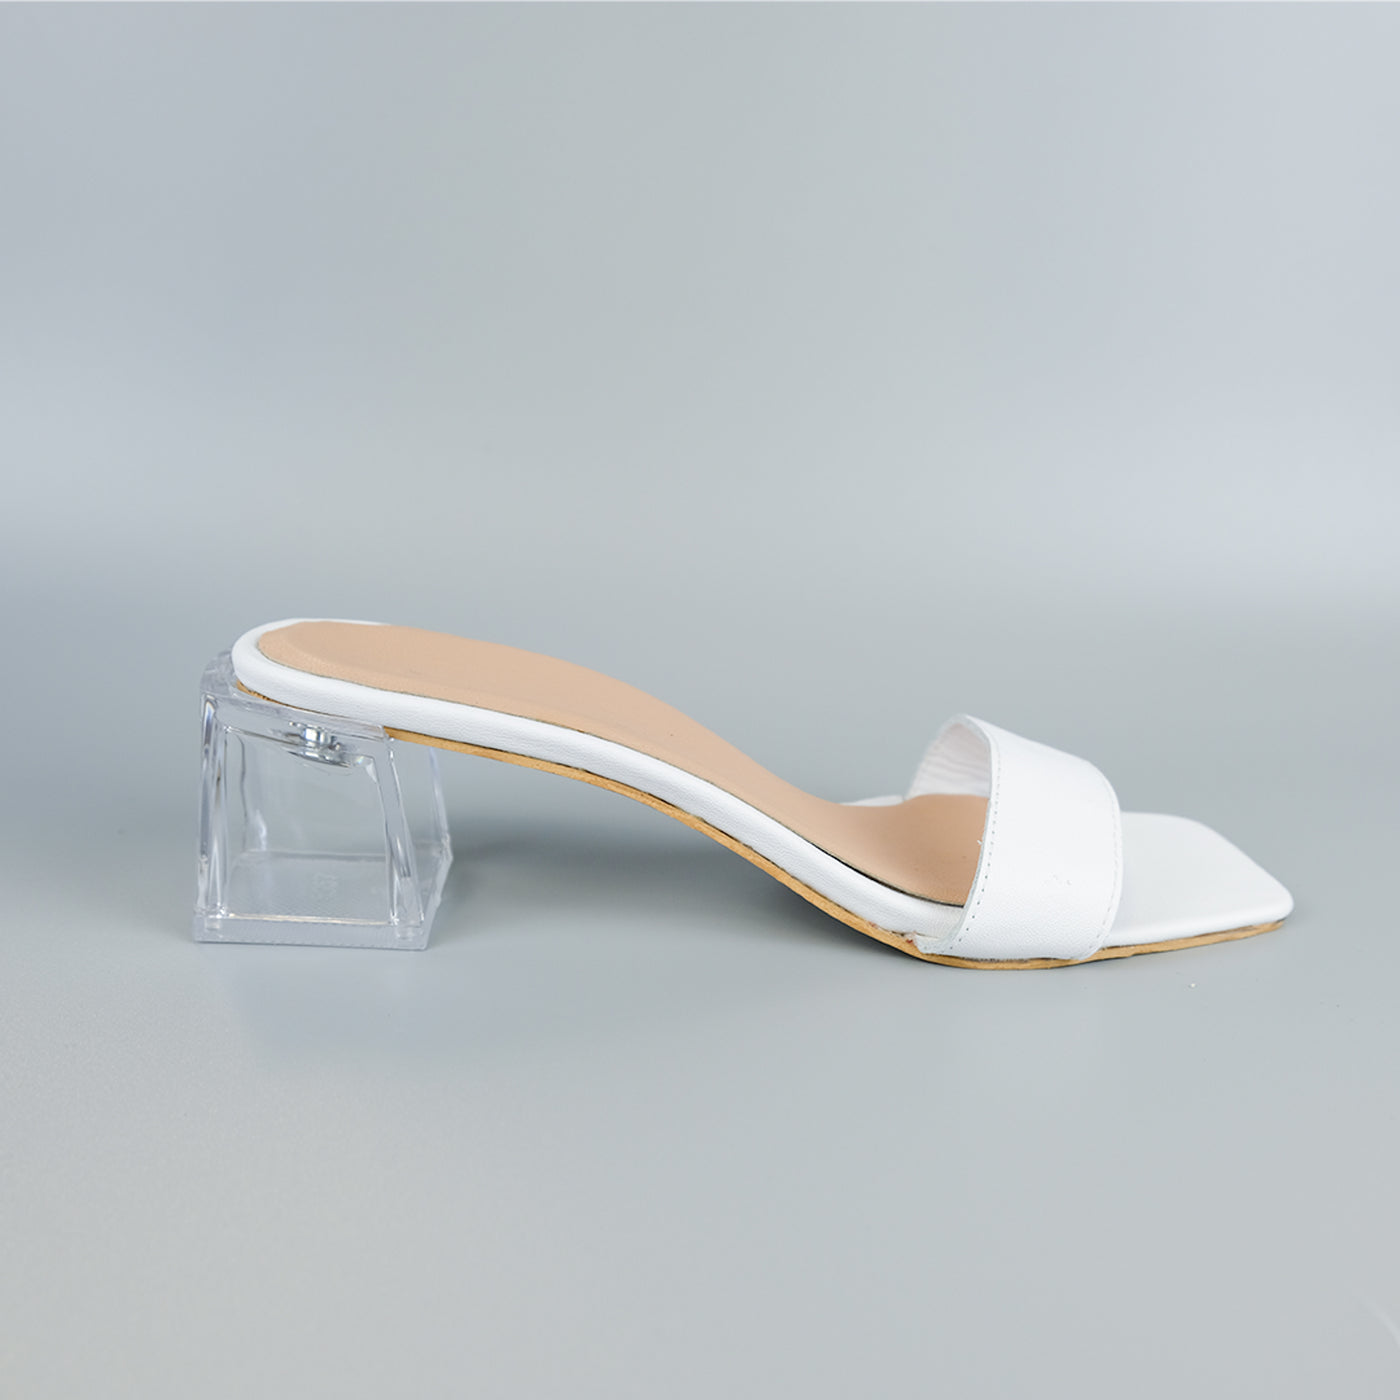 I Can Make Shoes transparent 55mm mid heel for DIY shoe making , sandals, mary janes, loafers, boots